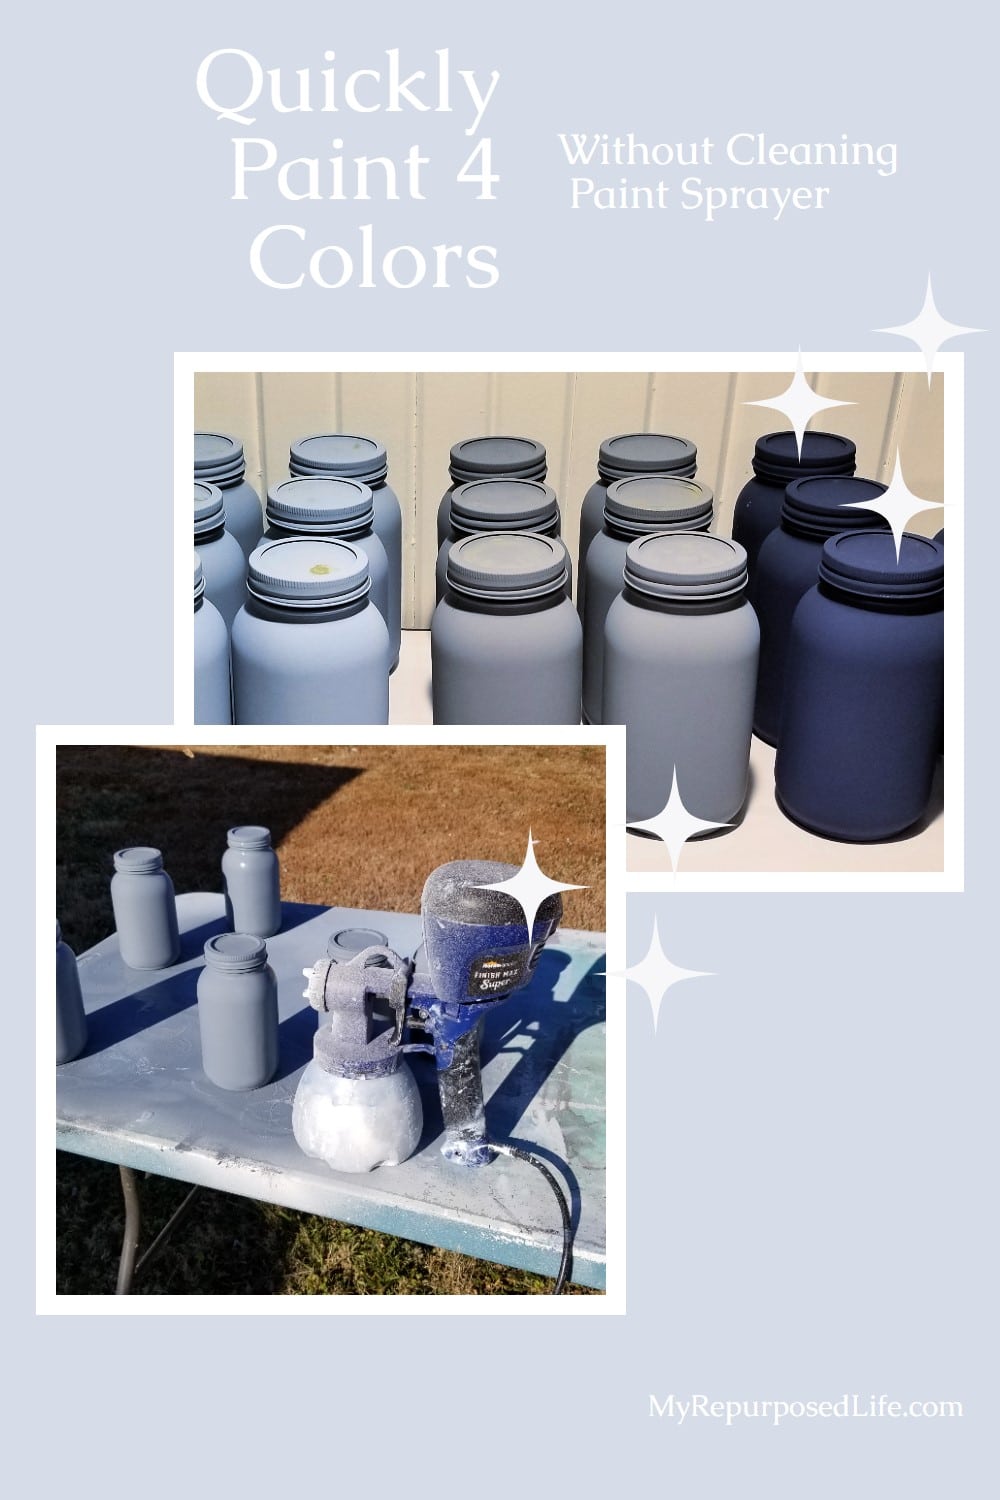 Here's a fun and easy way of painting mason jars FOUR different colors without changing out your paint cup or cleaning your paint sprayer. #MyRepurposedLife #repurposed #painting #masonjars #easy #diy via @repurposedlife